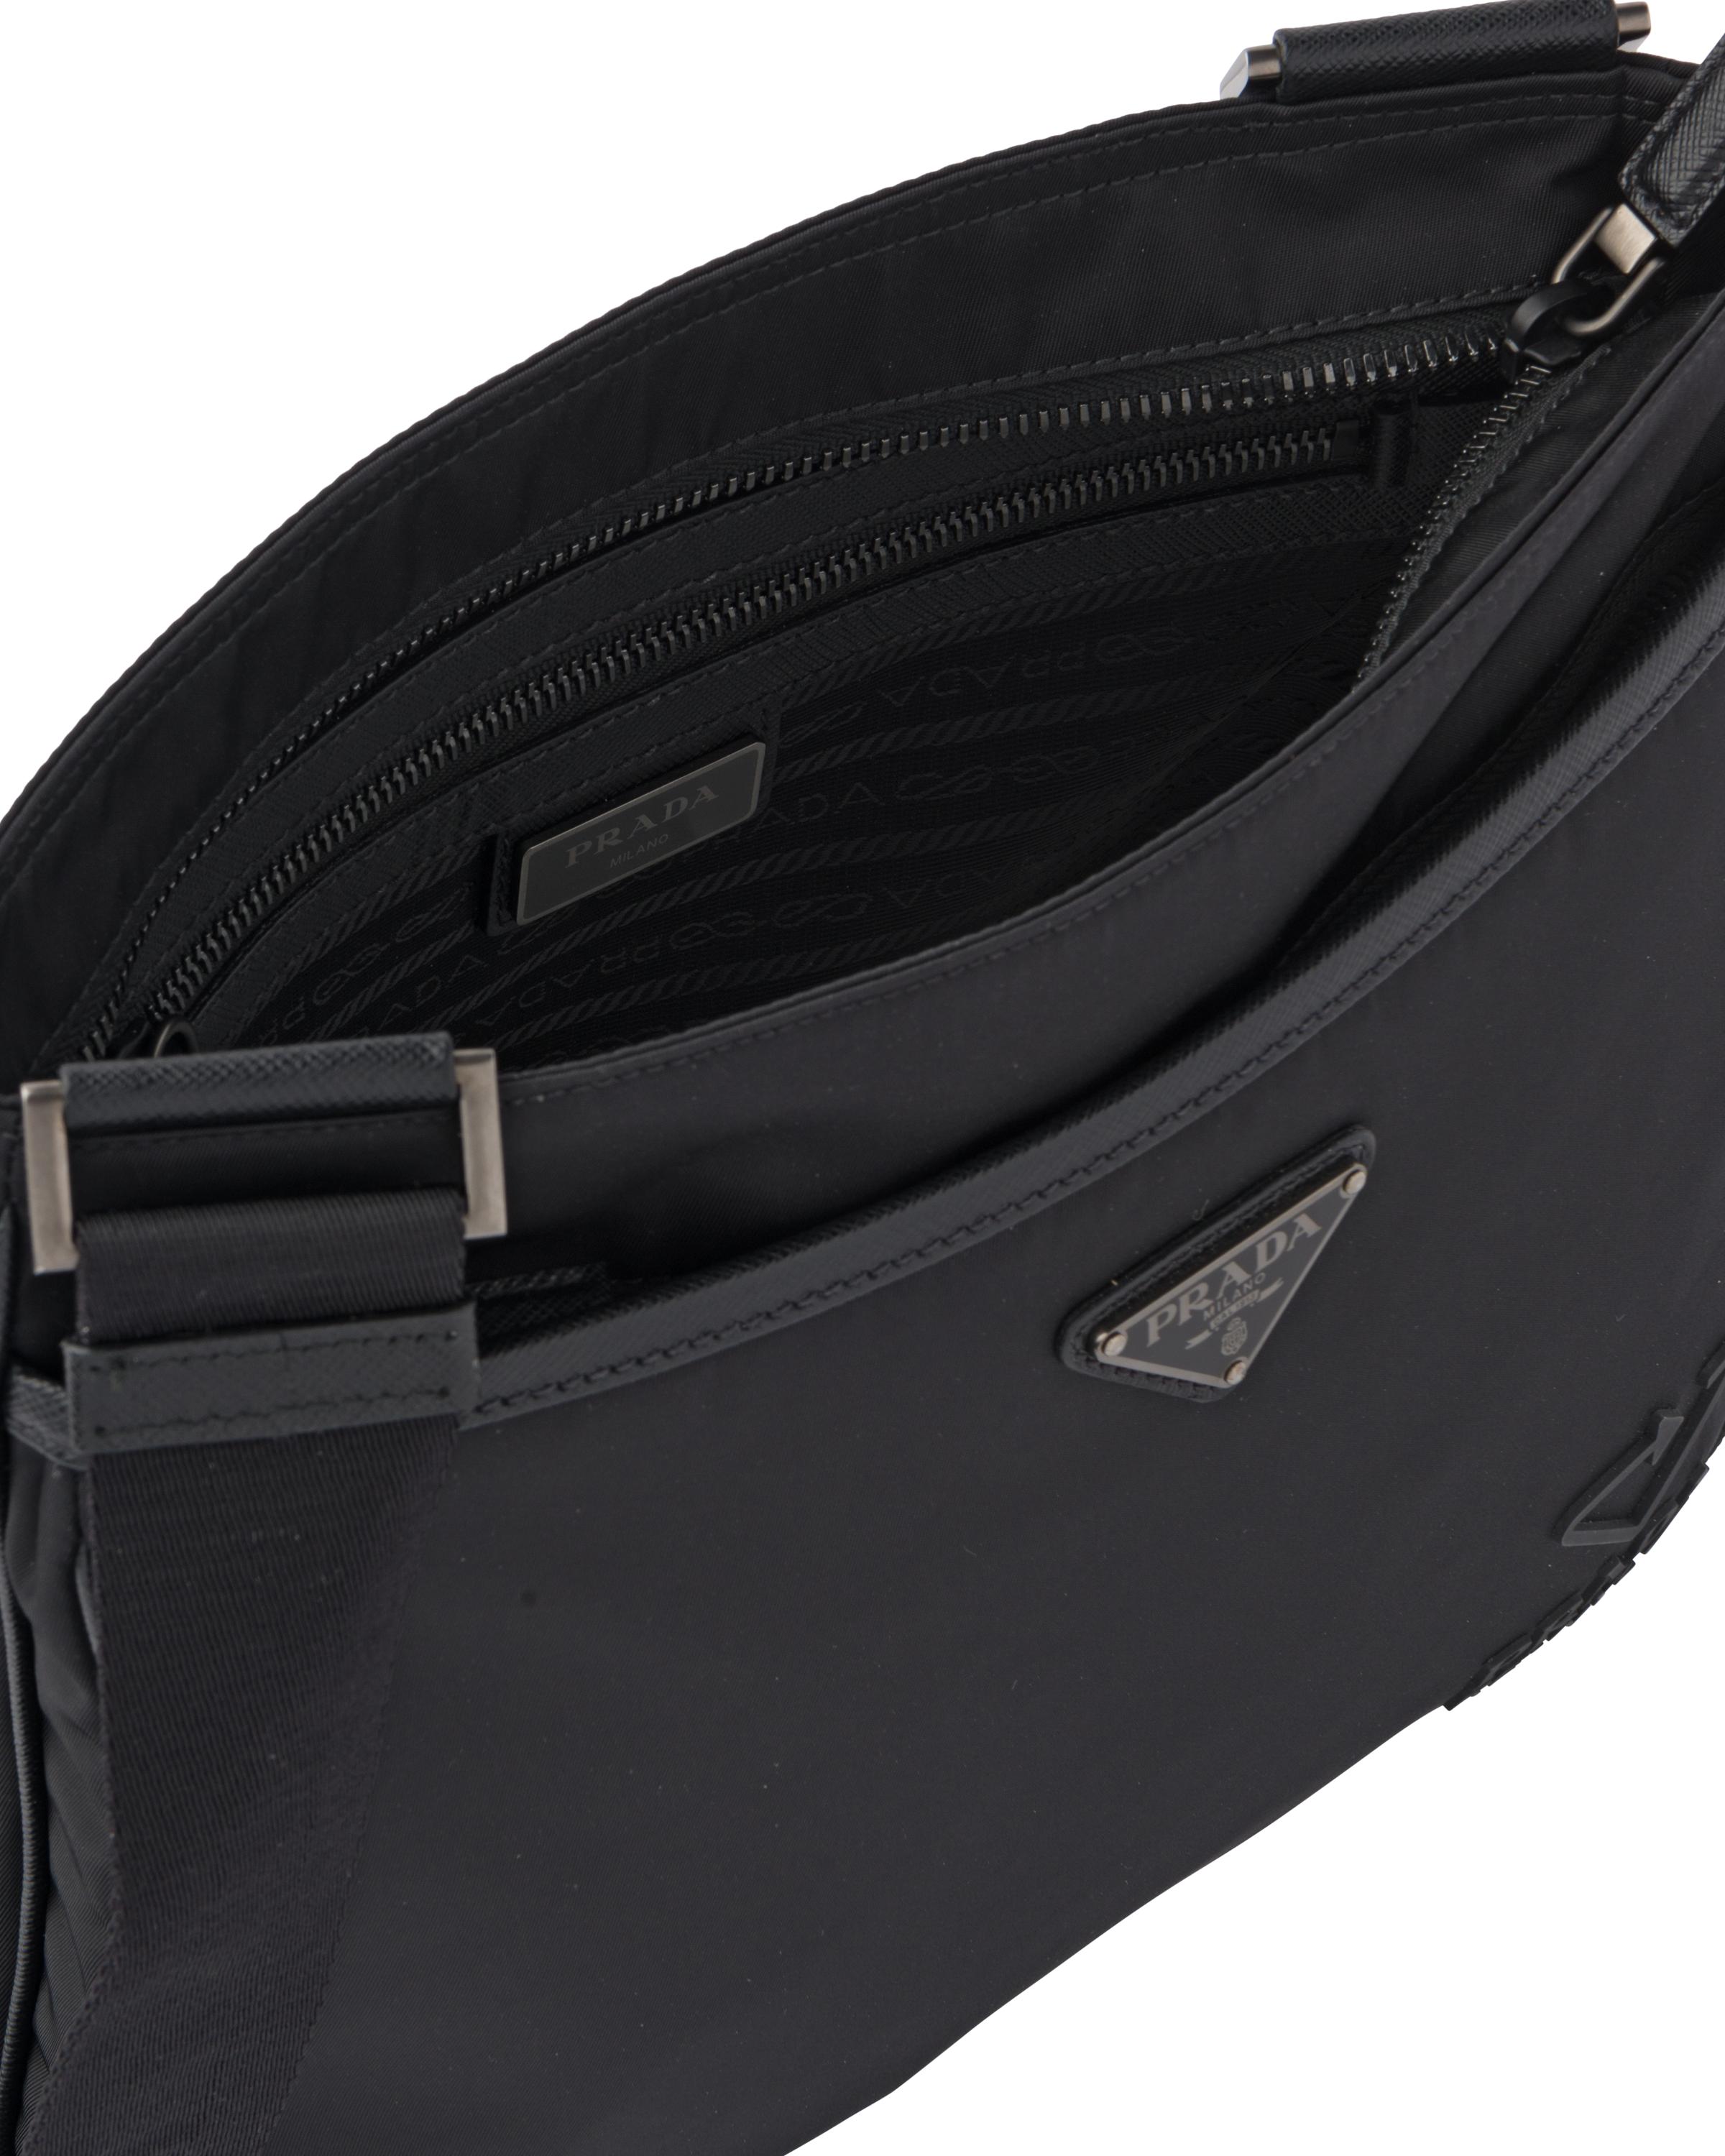 Prada Synthetic Re-nylon And Saffiano Leather Shoulder Bag in 